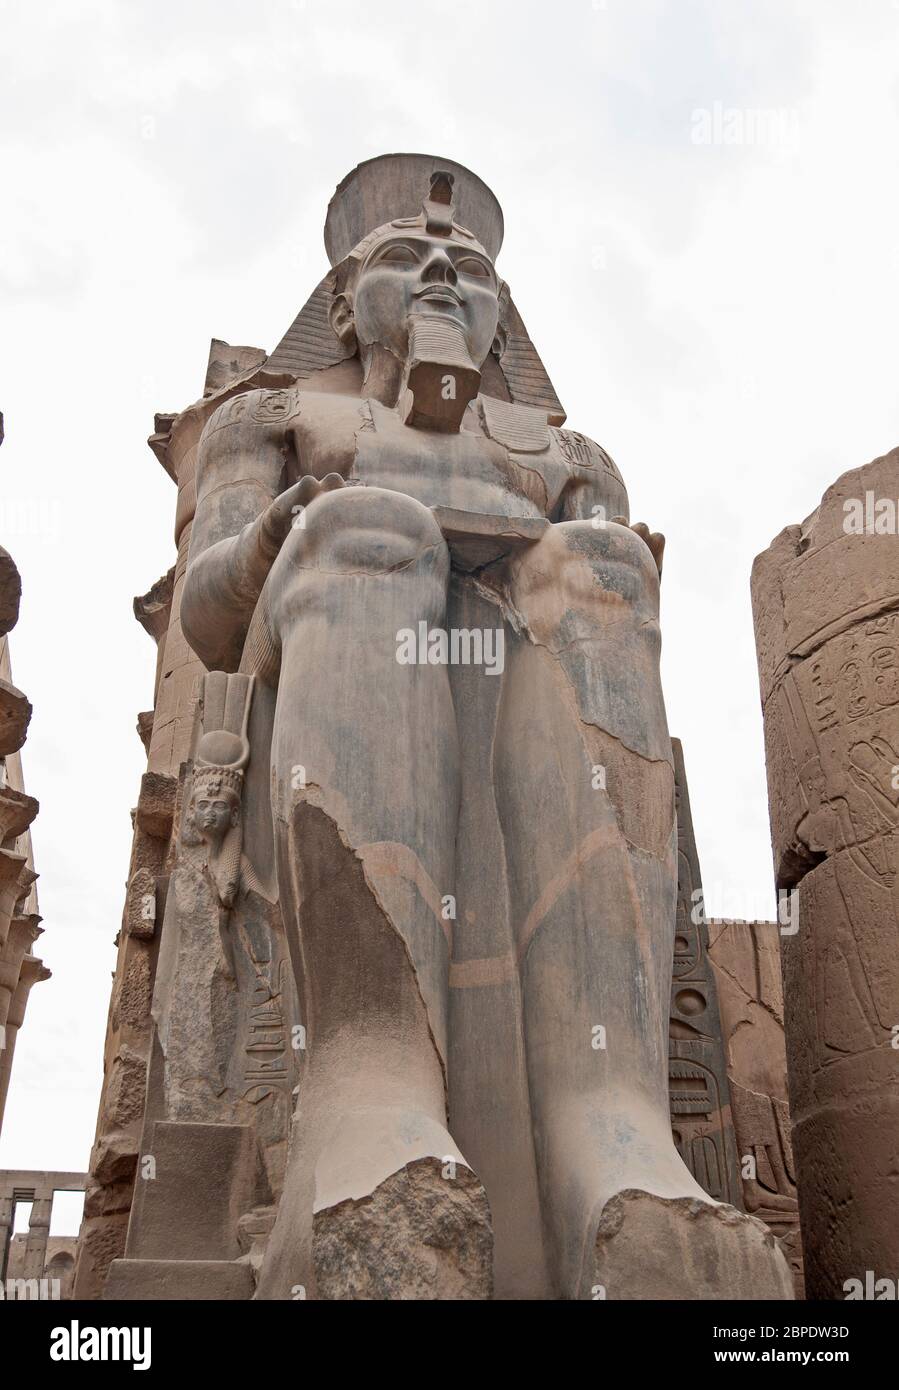 Large statue and hieroglypic carvings of Ramses II at the ancient egyptian Luxor temple isolated on white background Stock Photo